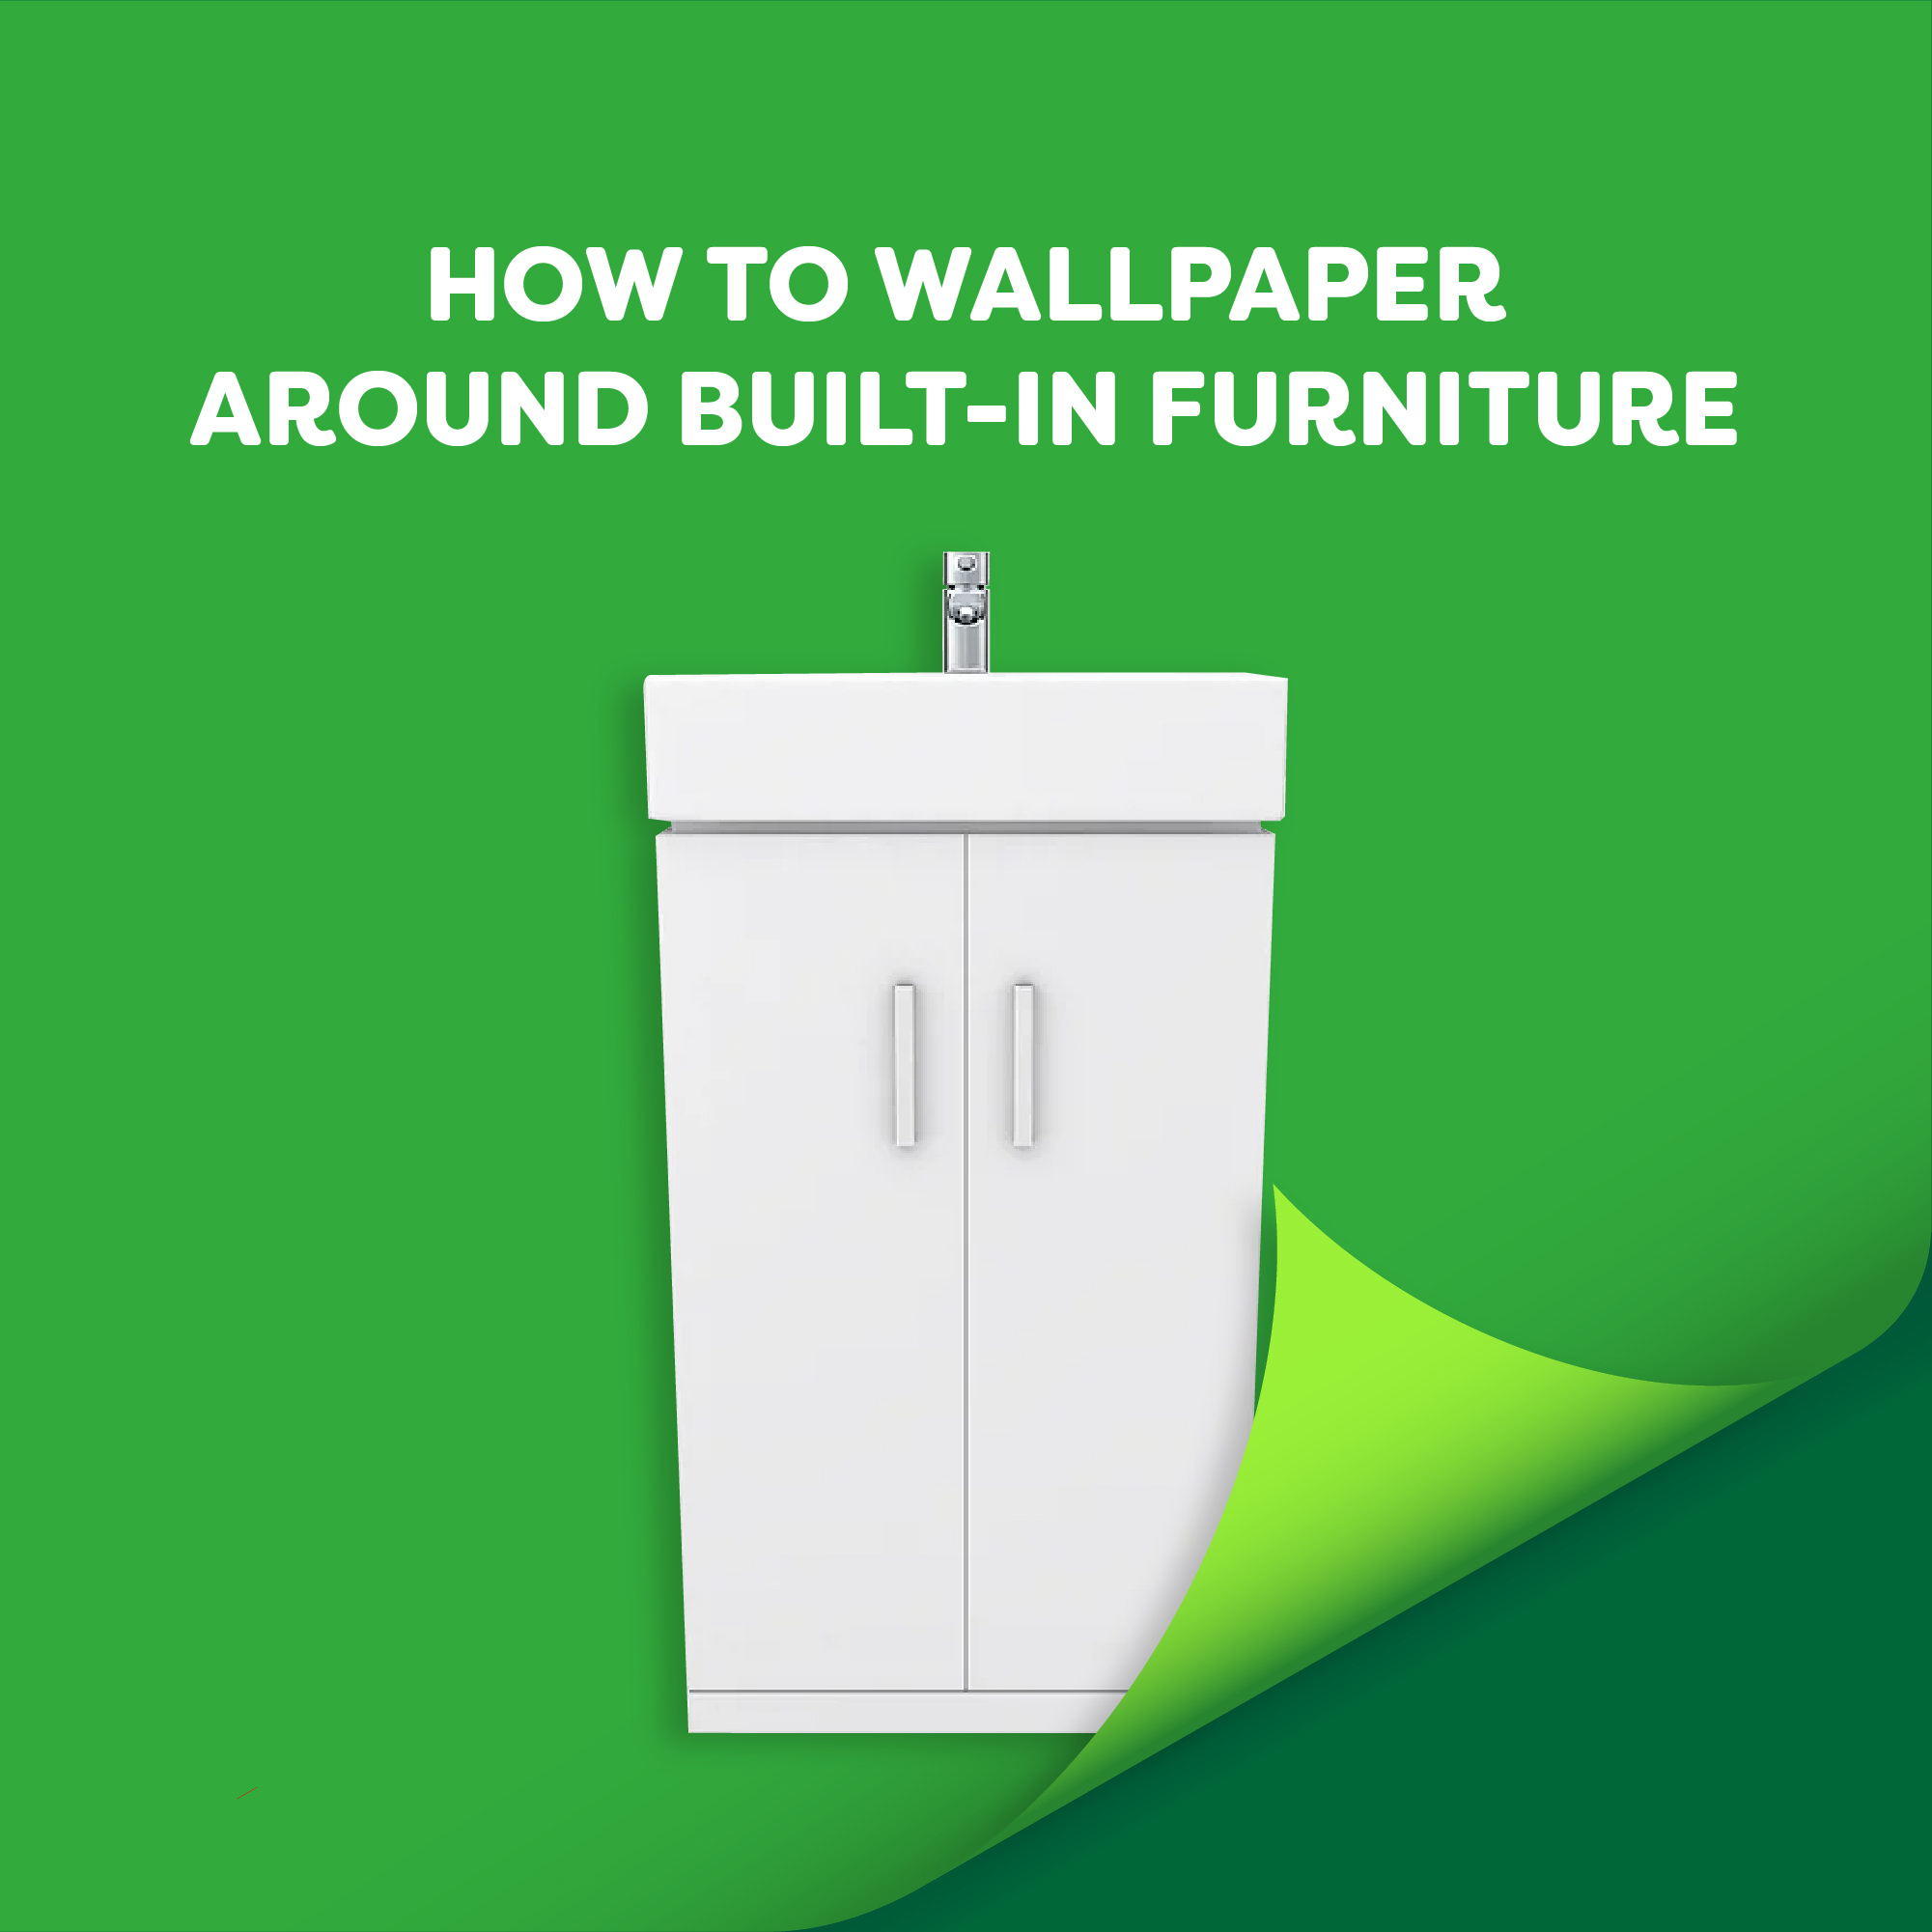 How to Wallpaper Around Built-in Furniture